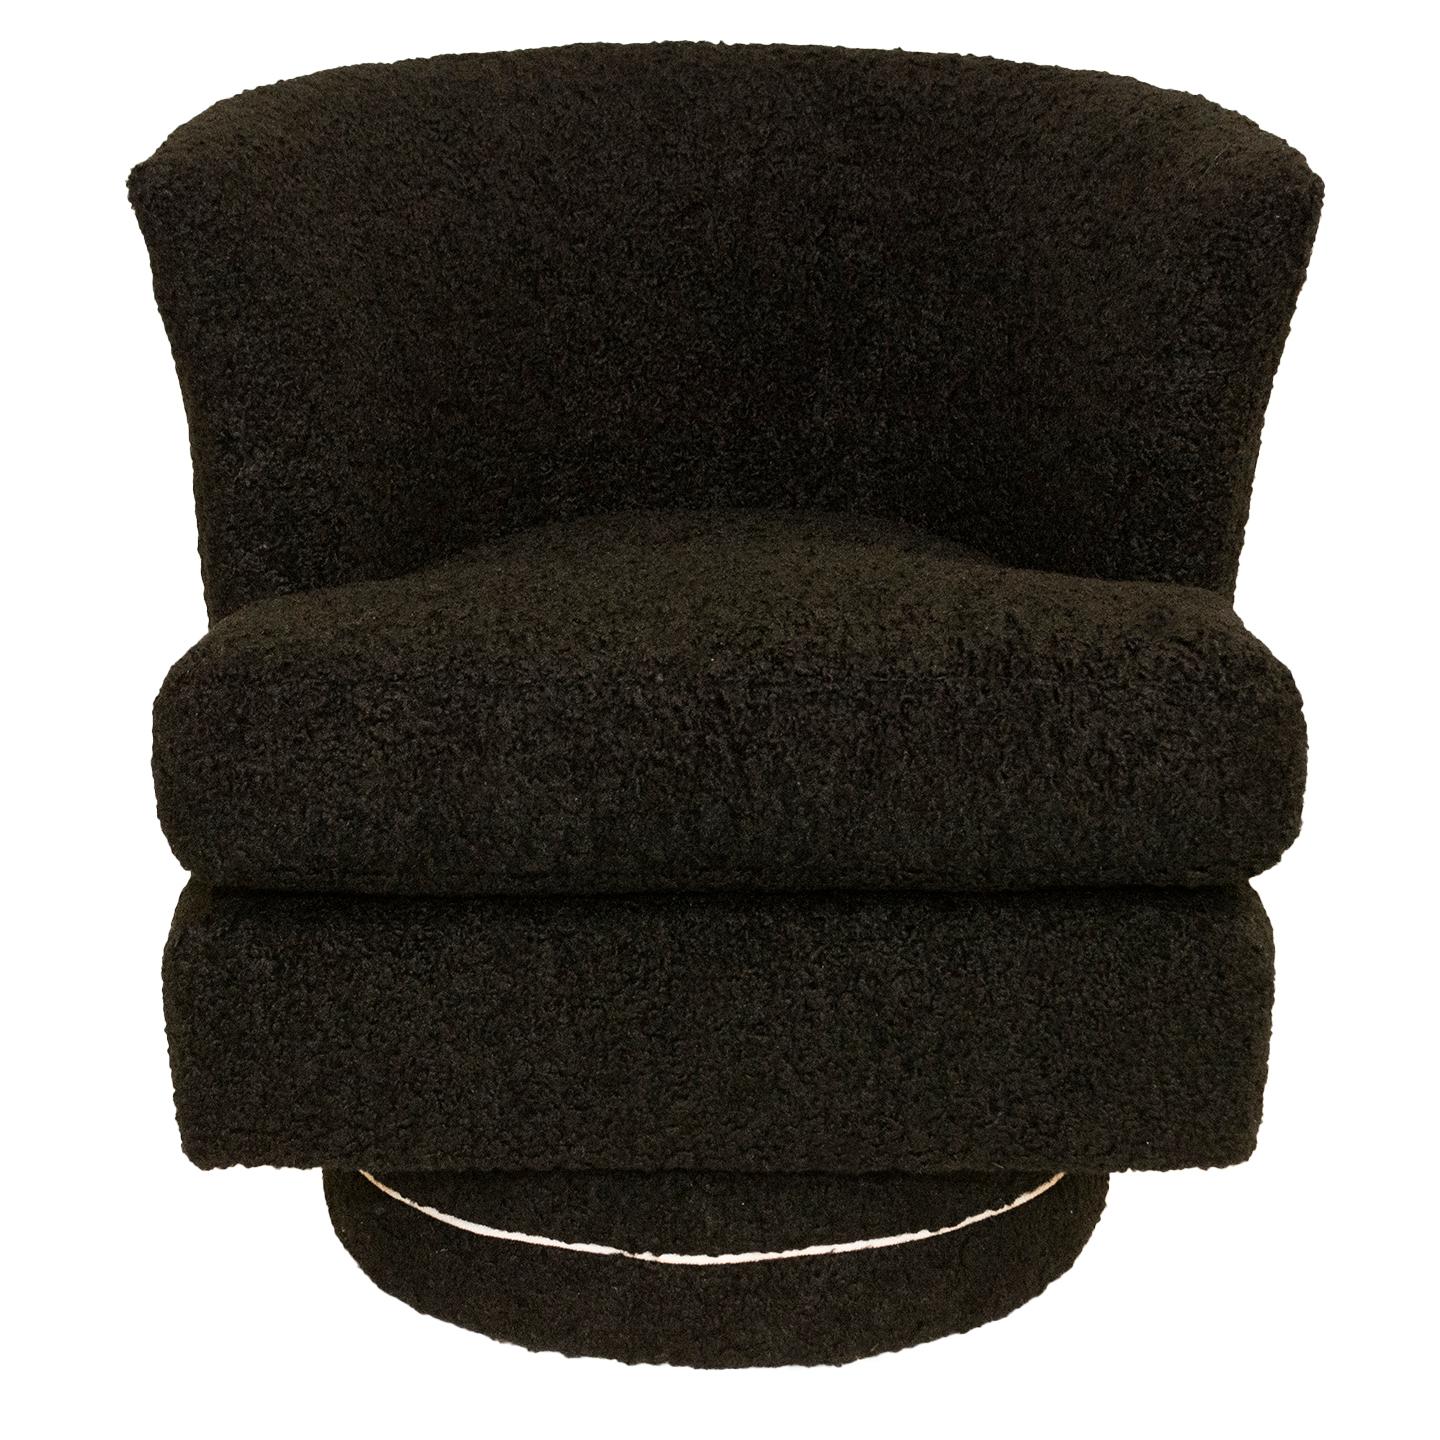 We have updated the upholstered chairs with swivel bases they were originally featured a skirt. They are upholstered in black faux shearling. We designed custom circular wooden bases and they were specifically made for these chairs. They were